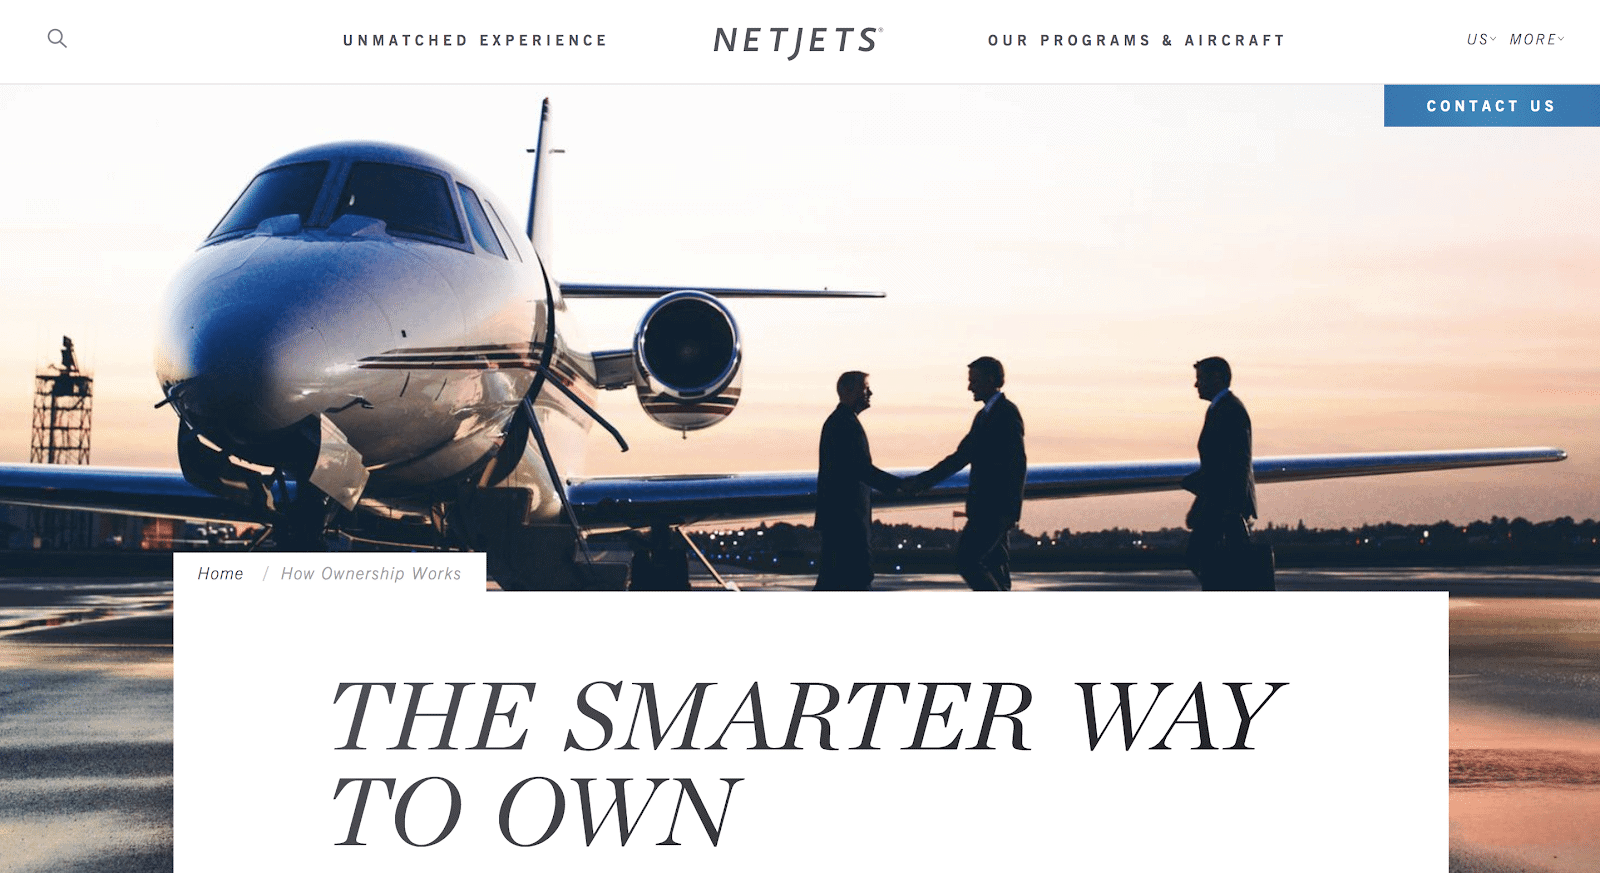 The NetJets homepage